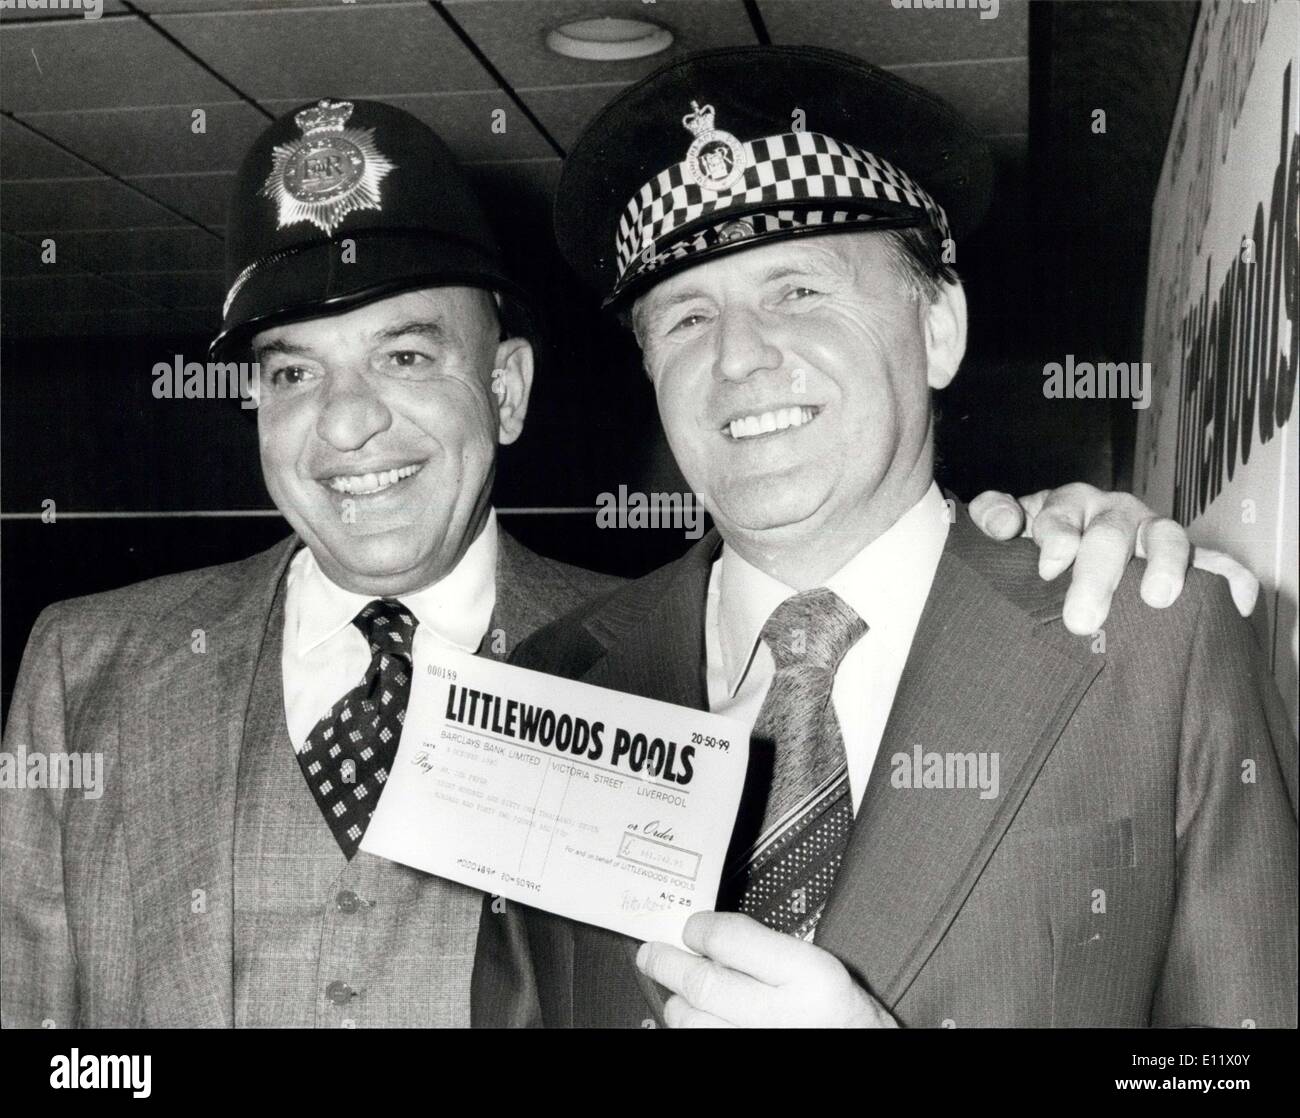 Oct. 06, 1980 - A Fair Cop' Ex-Policeman wins ?881,74,95 on the Pools: Retired Police Sergeant Joe Fryer this week made his best ever 'cop' when in London today he received his reward cheque for ?861,742.95 from the famous American Television 'cop' Telly (Kojak) Savalas. Joe won the top dividend on Littlewood Pools, making him the second biggest winner of all time. Photo shows Telly Savales wearing a London Bobbies helmet with Joe Fryer after presenting the cheque in London today. Stock Photo